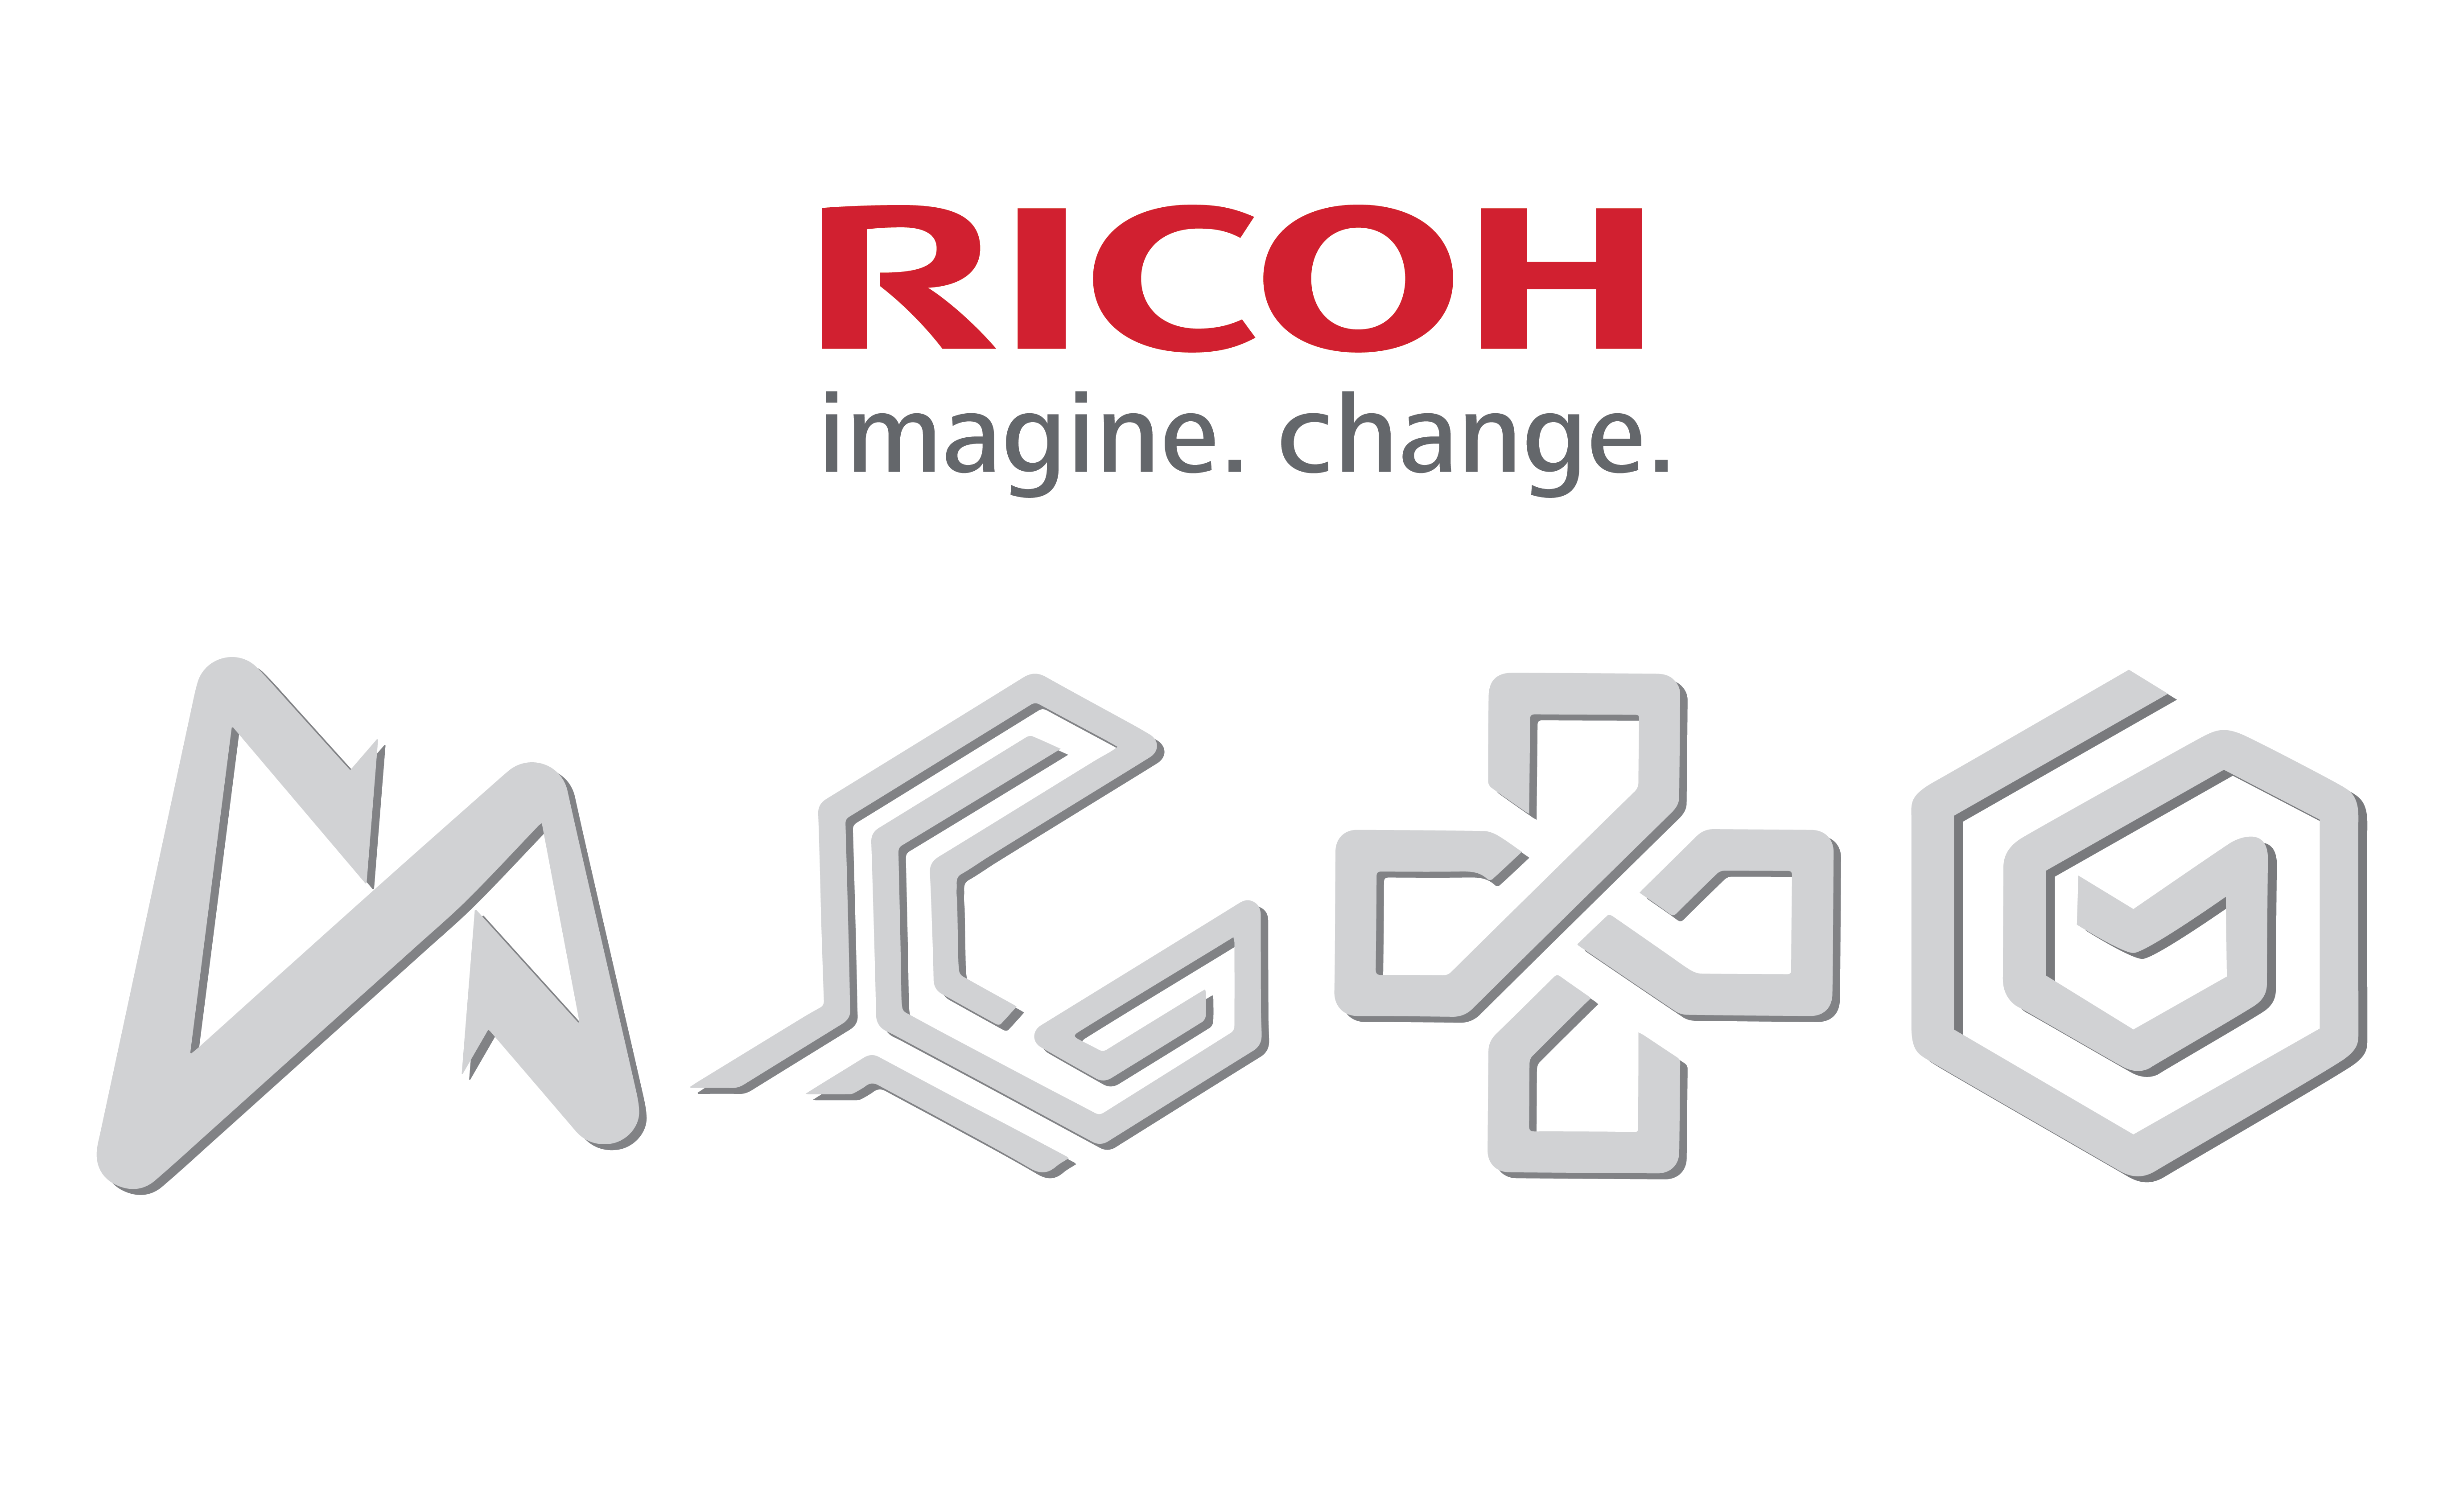 Ricoh imagine. change. logo with 3 grey colored logos depicting the 3 different maintenance plan options (Advanced Exchange, Basic, Scan Care, and Depot packages)